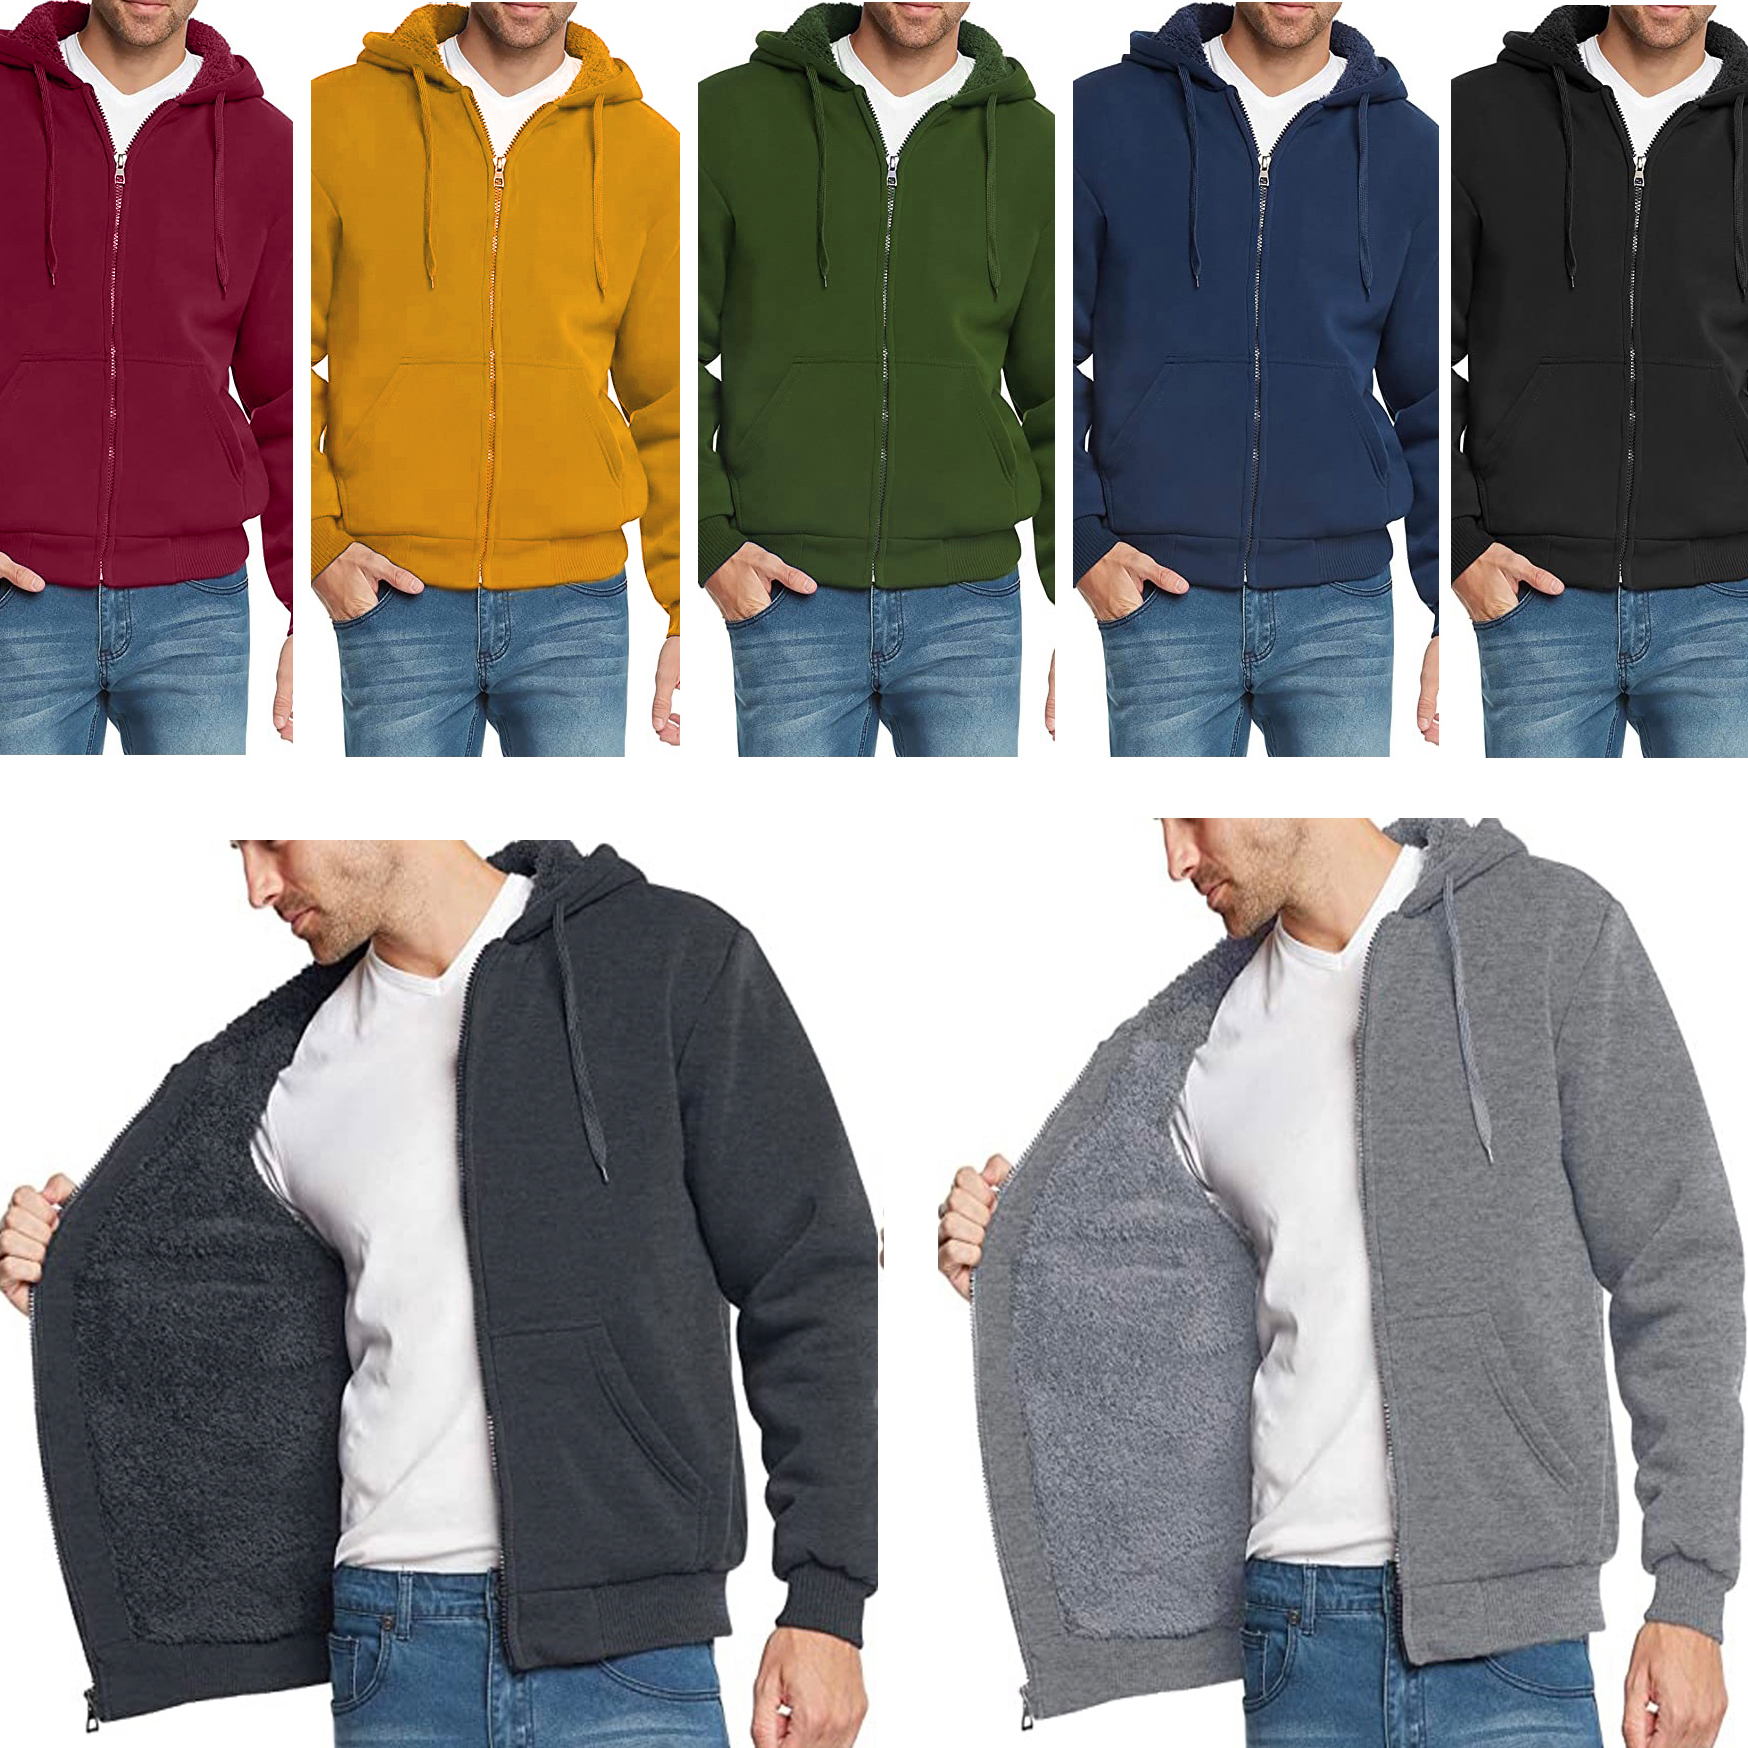 Men's Extra-Thick Sherpa Lined Fleece Hoodie (Big & Tall Sizes Available) - Charcoal, 3XL